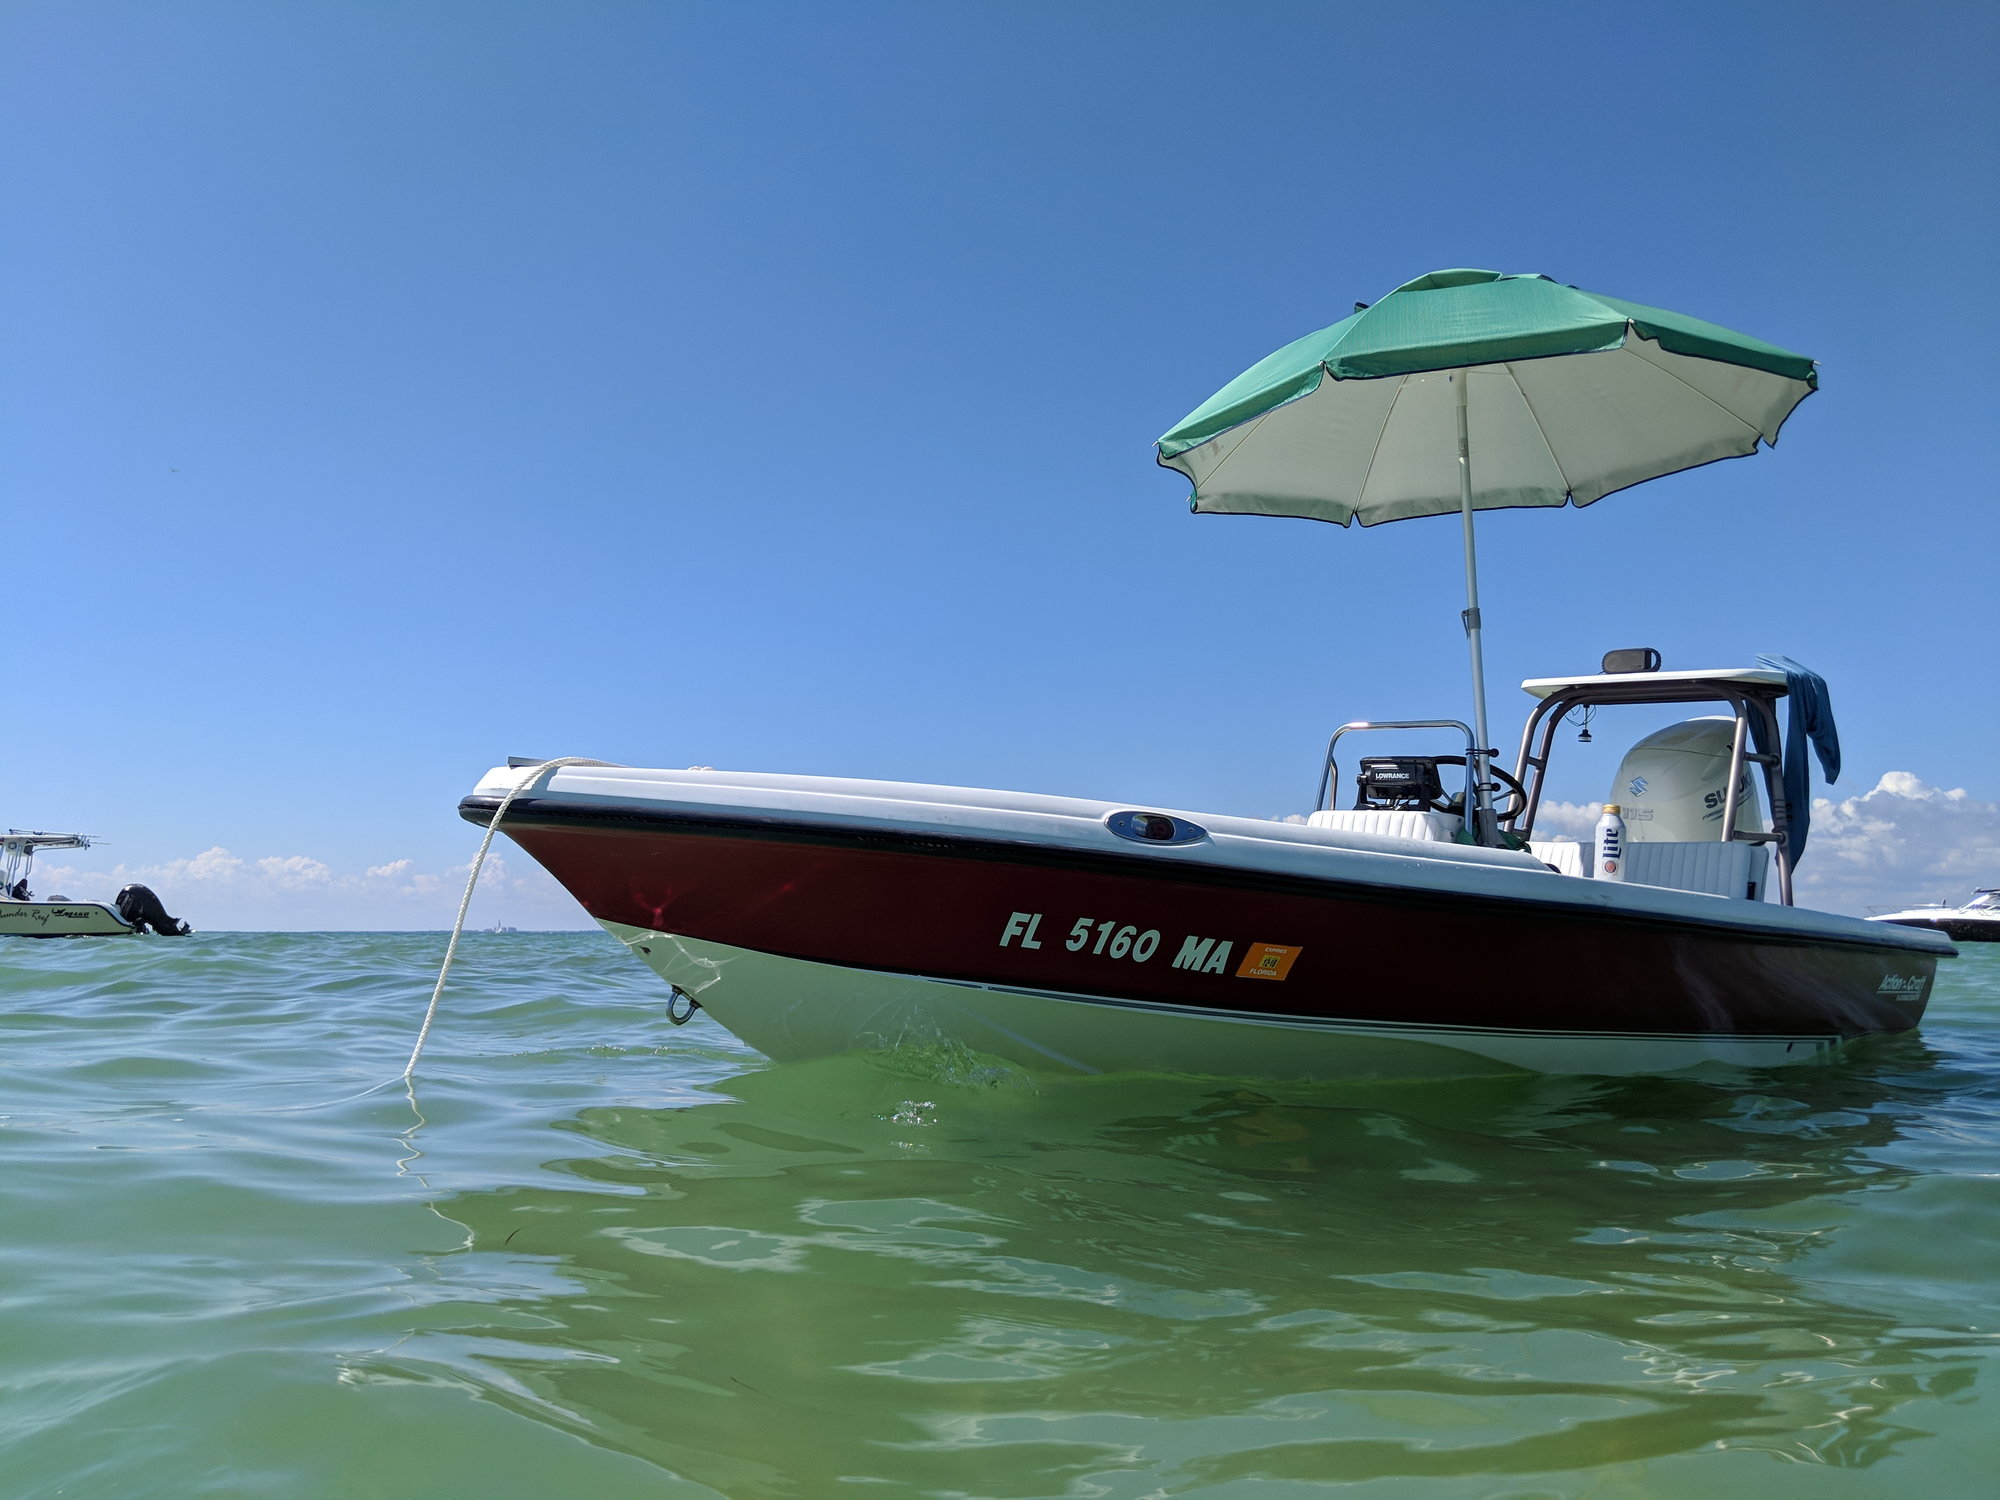 Boats without shade.. staying cool? - The Hull Truth - Boating and